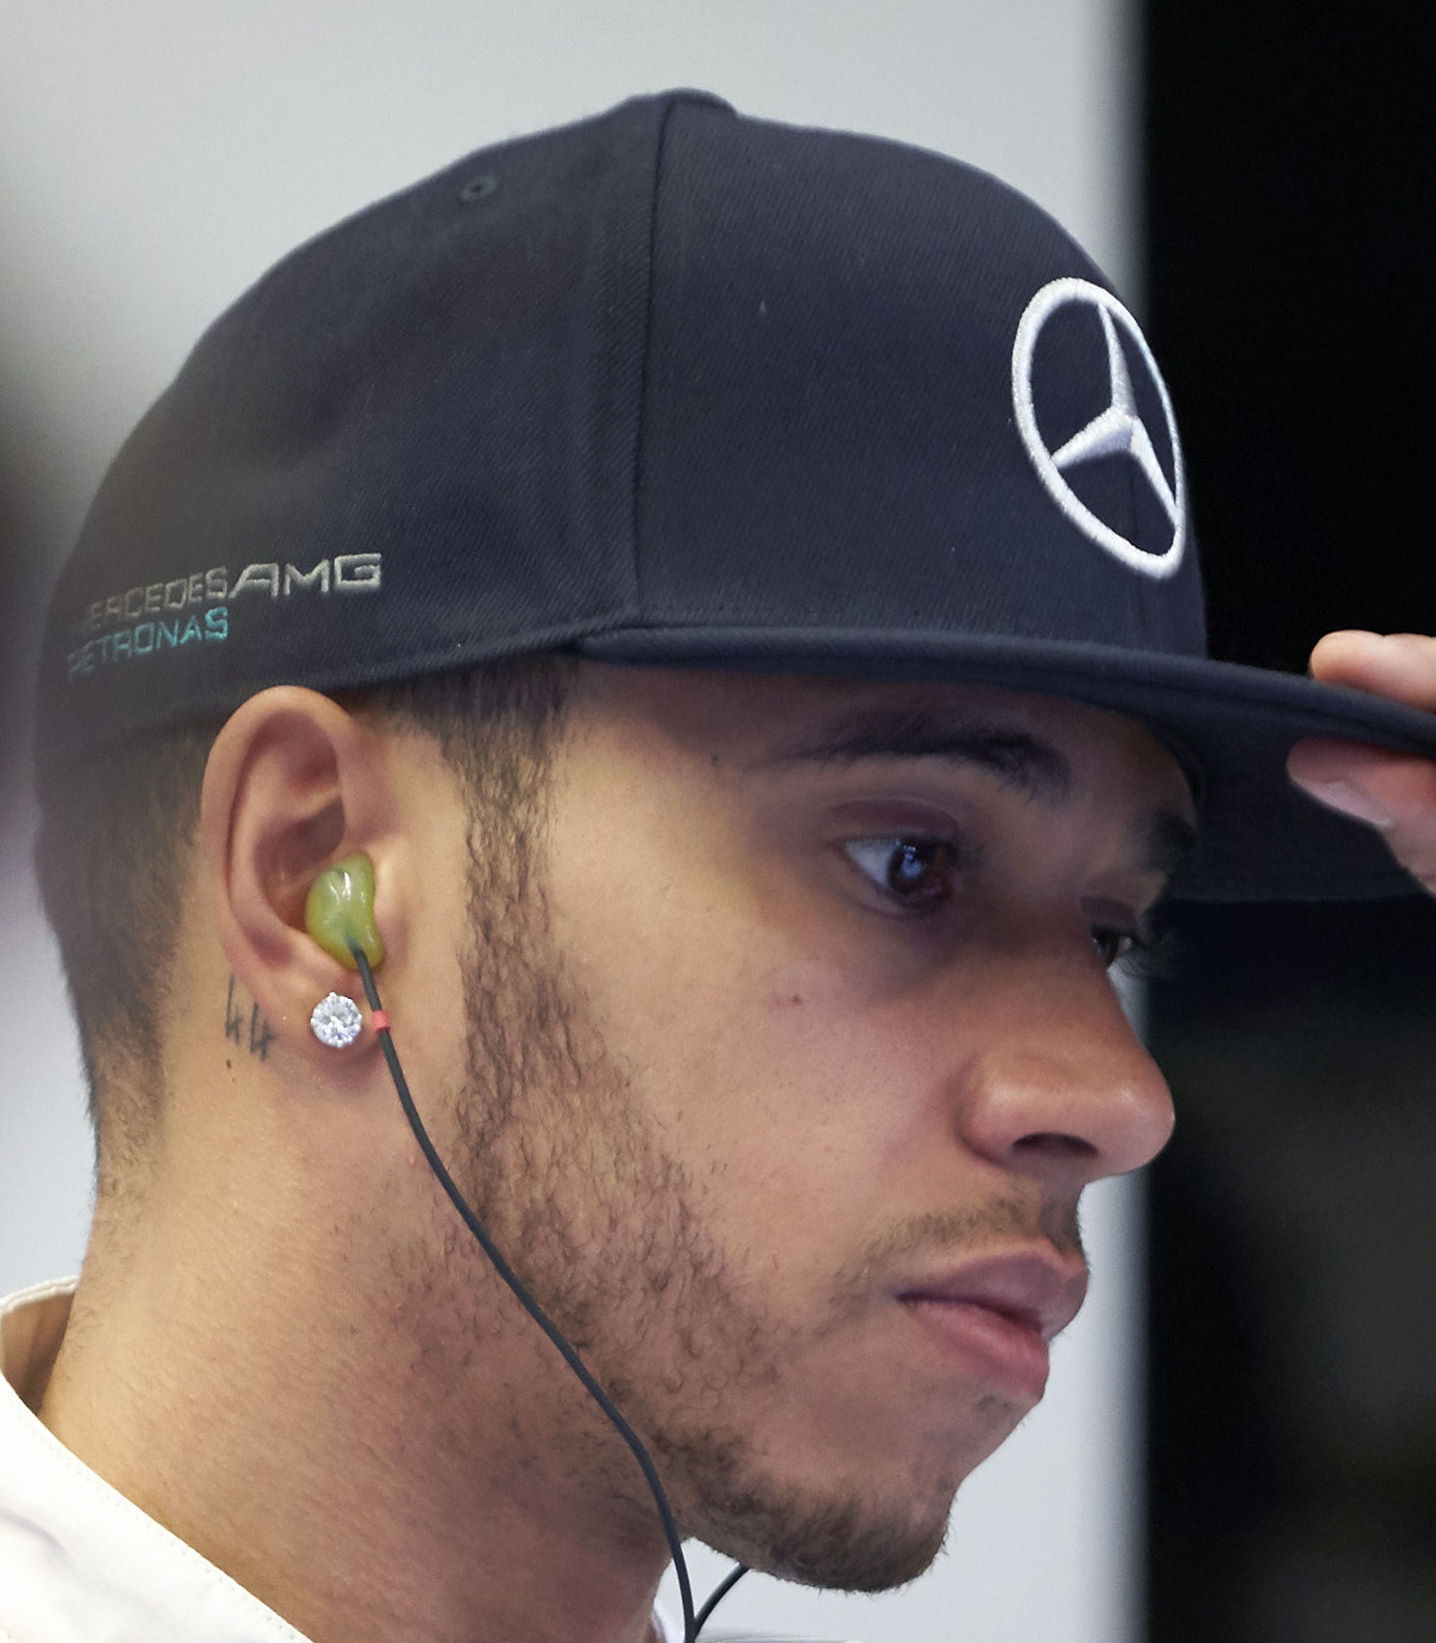 Hamilton was not watching the track while he was fiddling with the settings on the wheel. Is F1 a sport or an engineering endeavor?